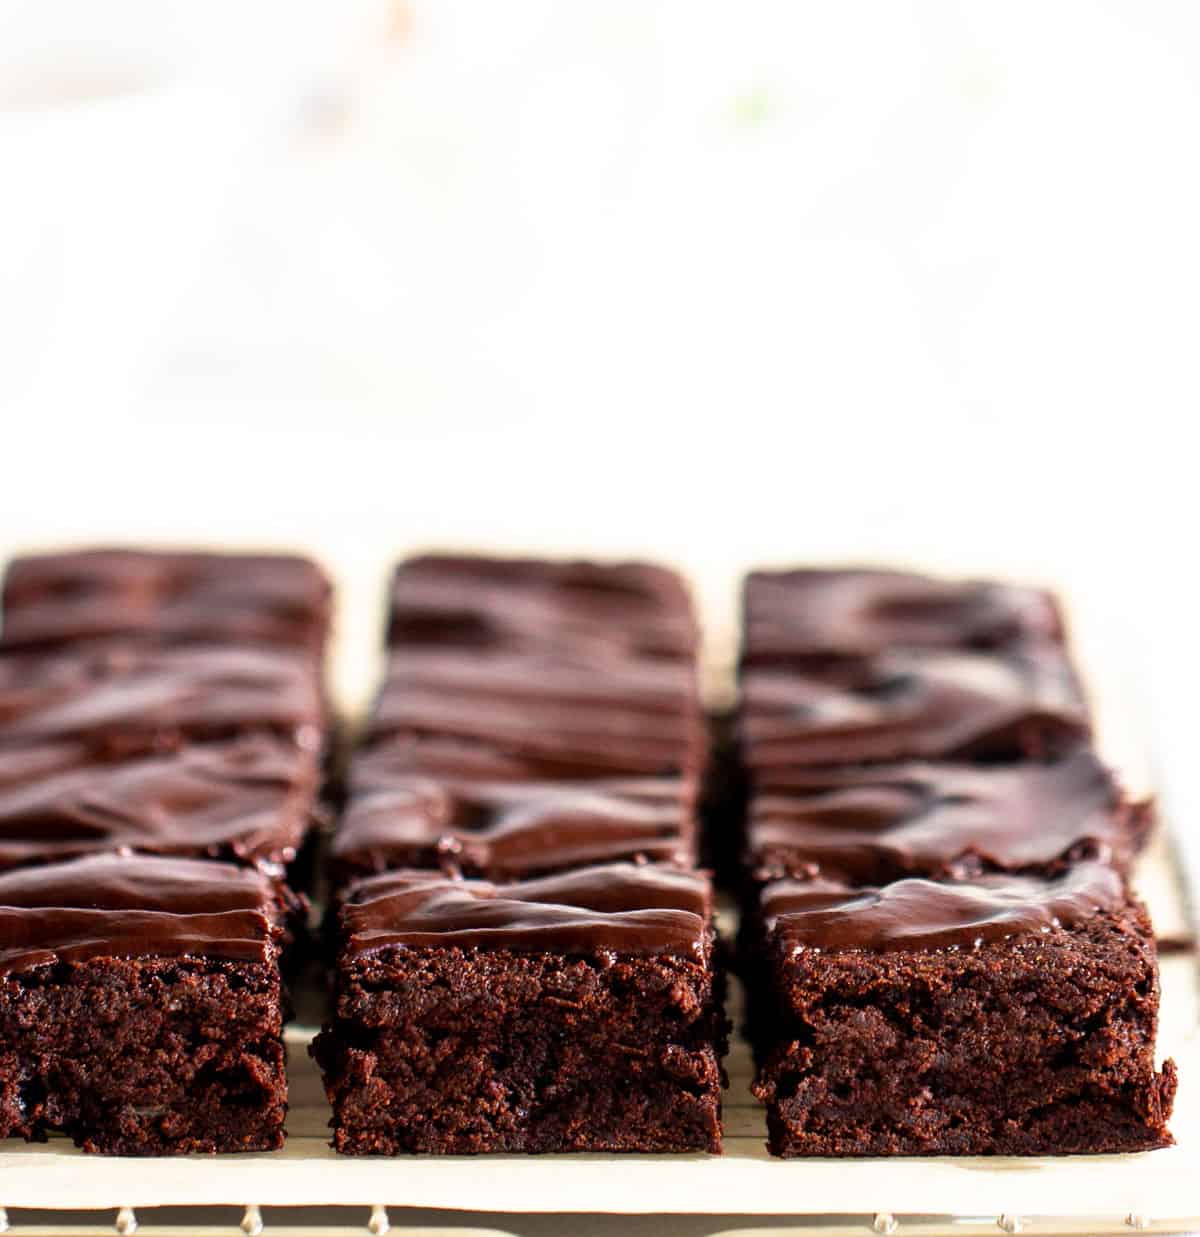 Brownie squares with ganache on top on parchment paper and wire rack